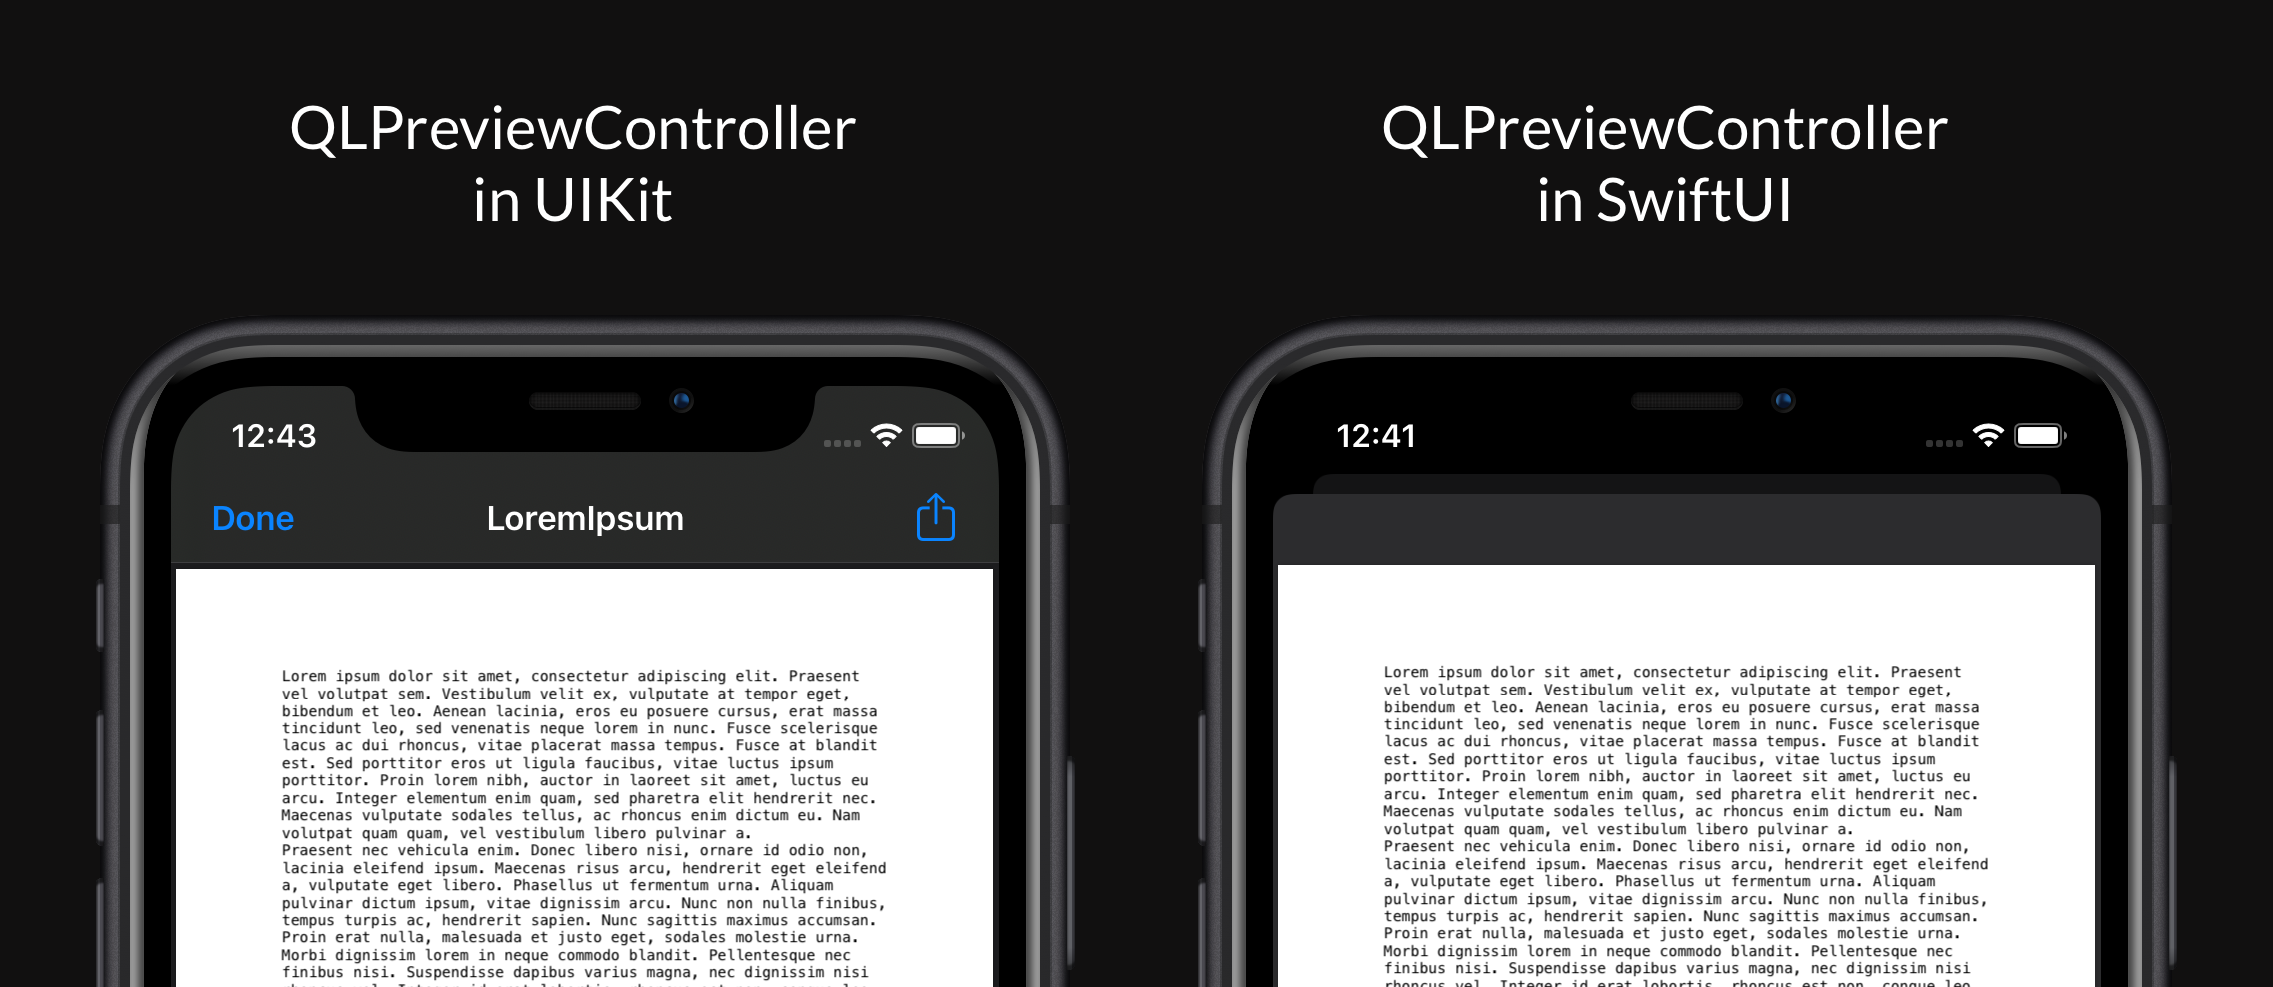 Two screenshots side by side one showing QLPreviewController in UIKit with a Done button and a share button and one showing QLPreviewController in SwiftUI with no buttons